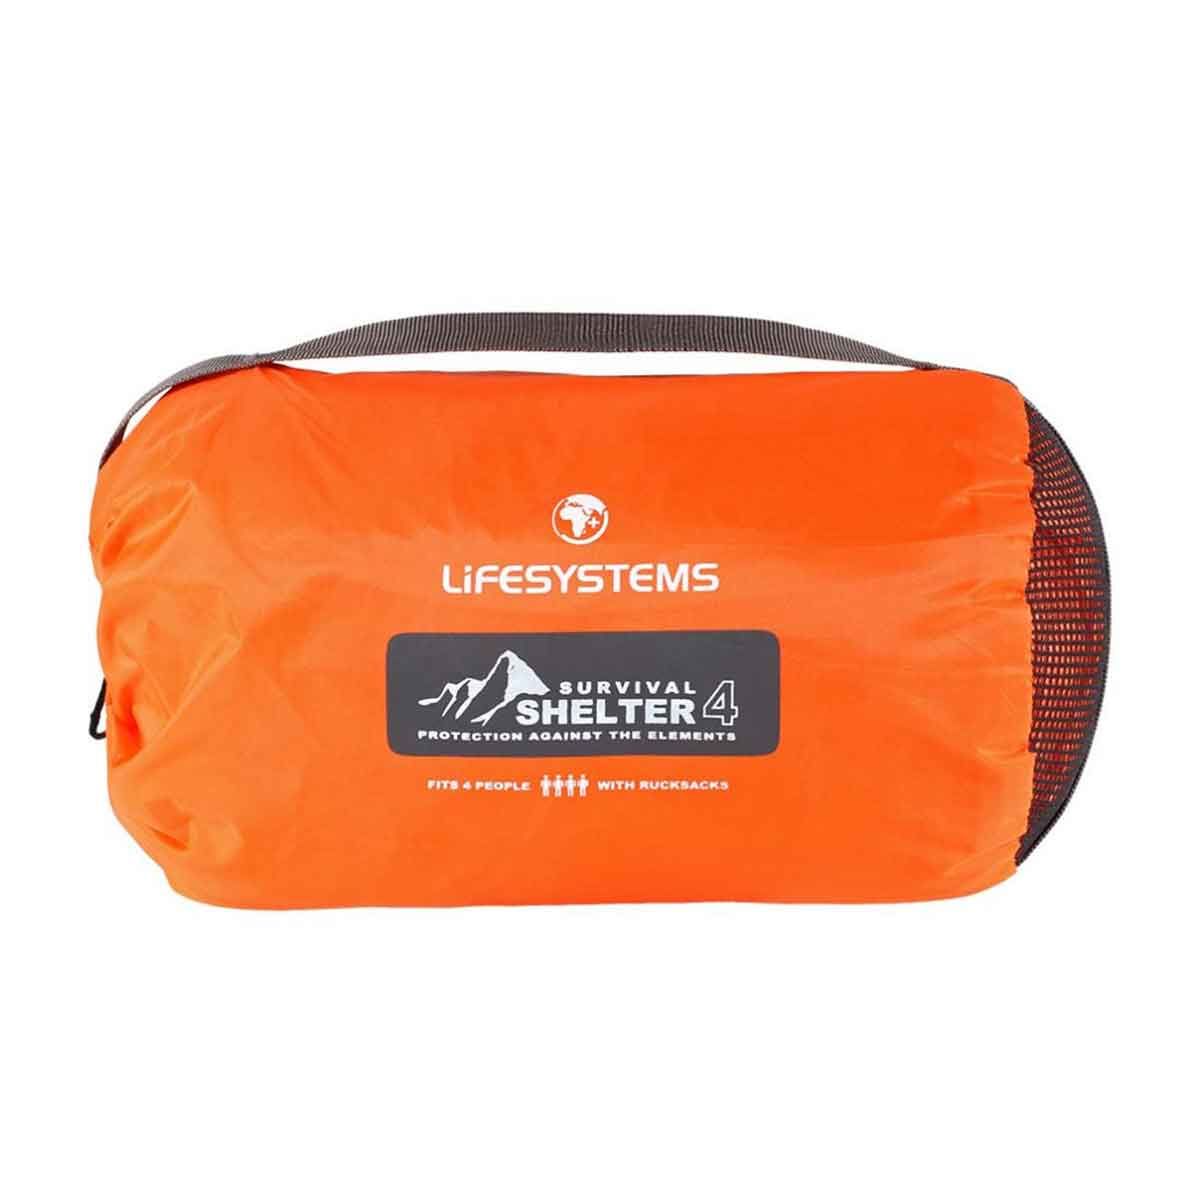 Lifesystems survival shelter 4 - 4 people